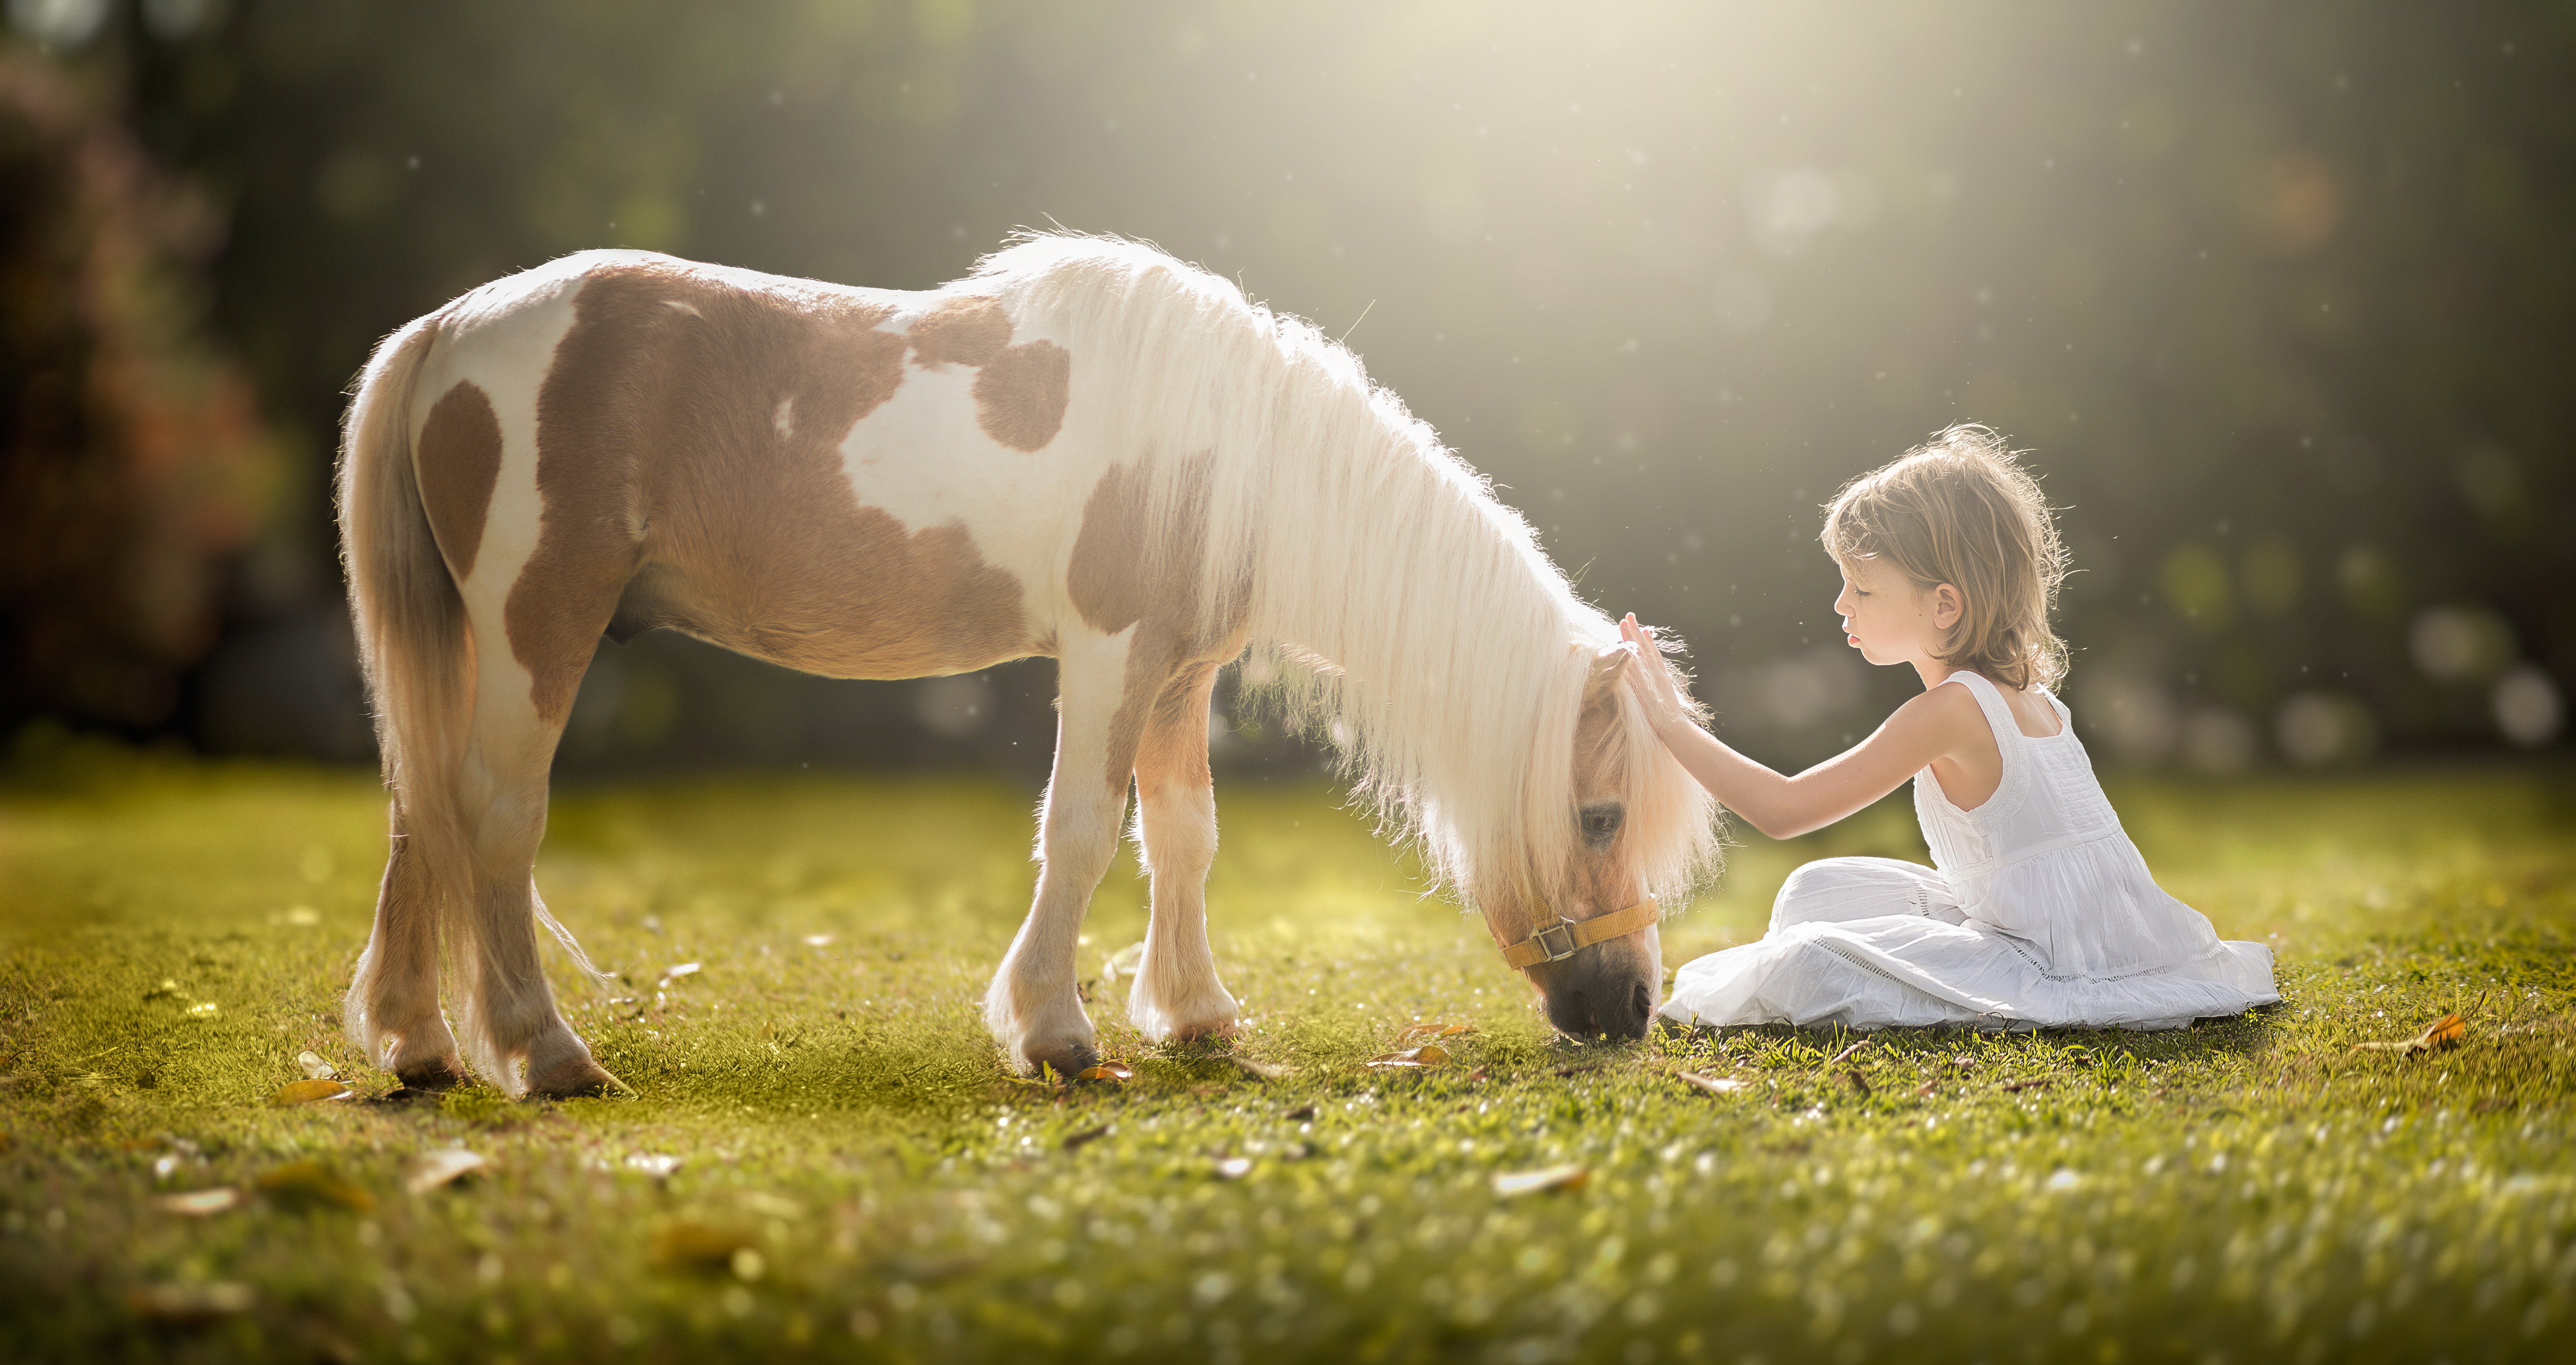 wallpapers child, photography, blonde, grass, little girl, pony, sunny, white dress